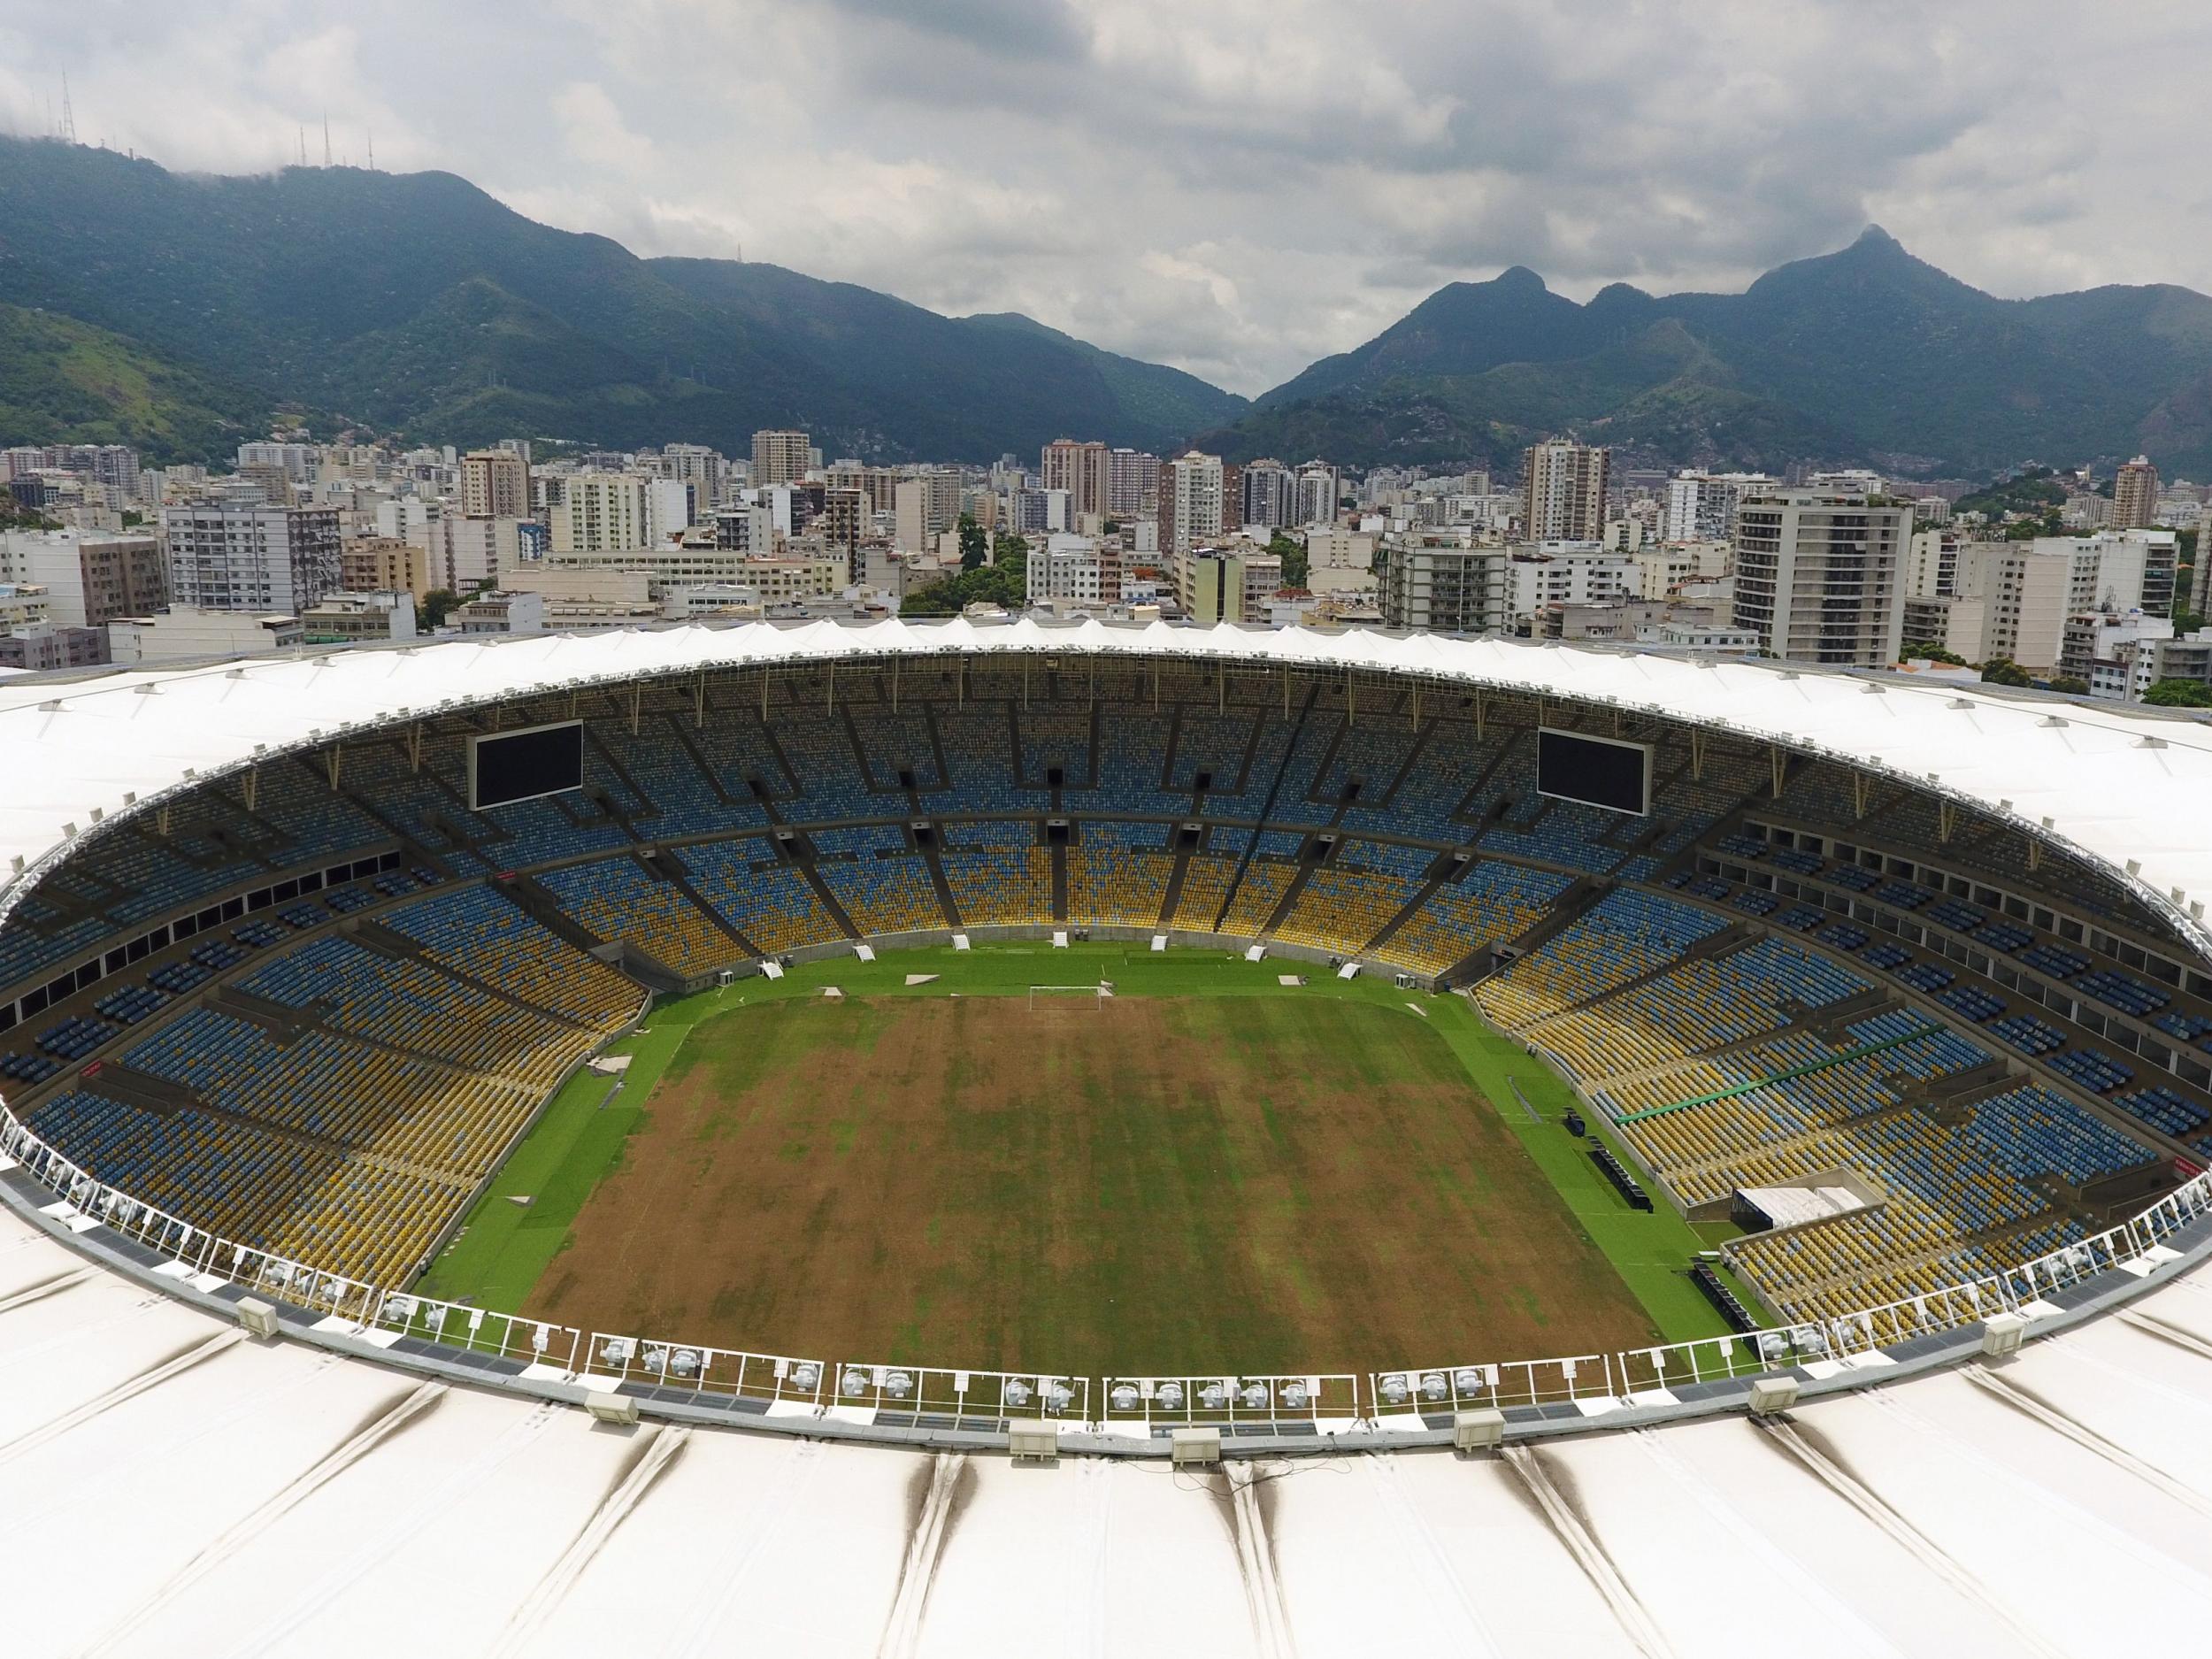 The Maracana Stadium in Rio de Janeiro six months after the 2016 Olympic Games